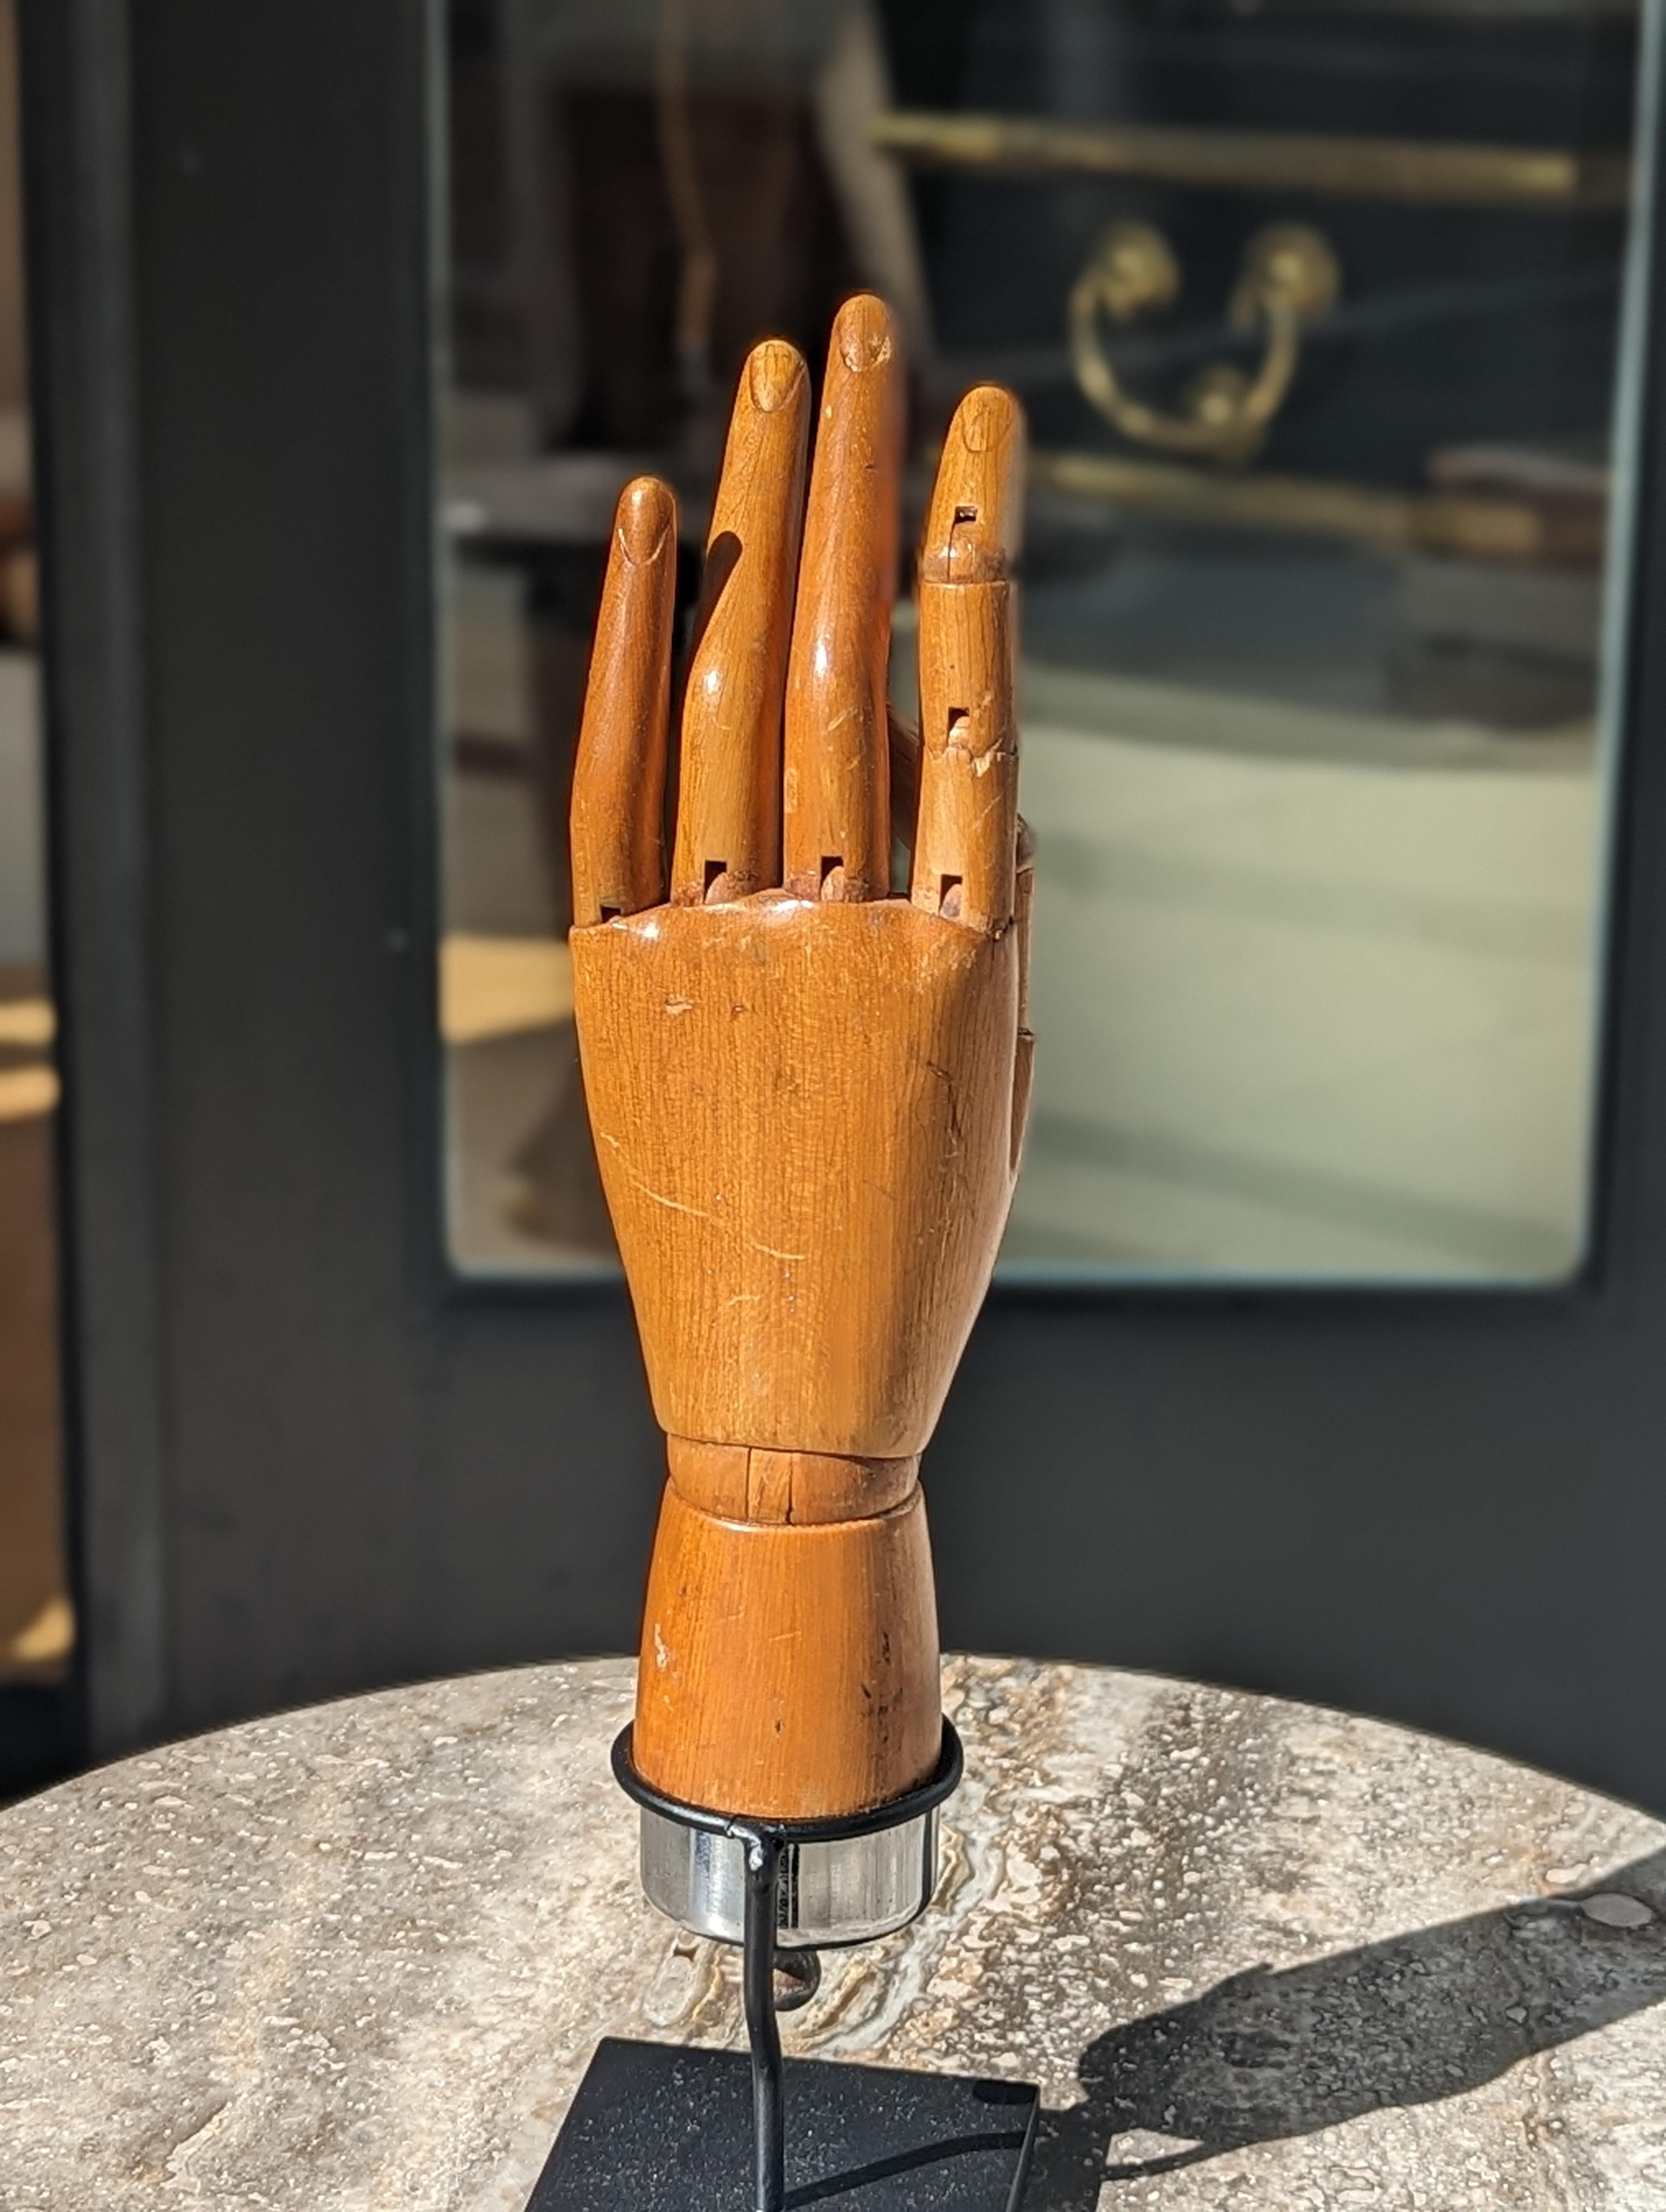 C.1900 Articulated Wooden Hands - Artist's Model or Display In Good Condition For Sale In San Francisco, CA